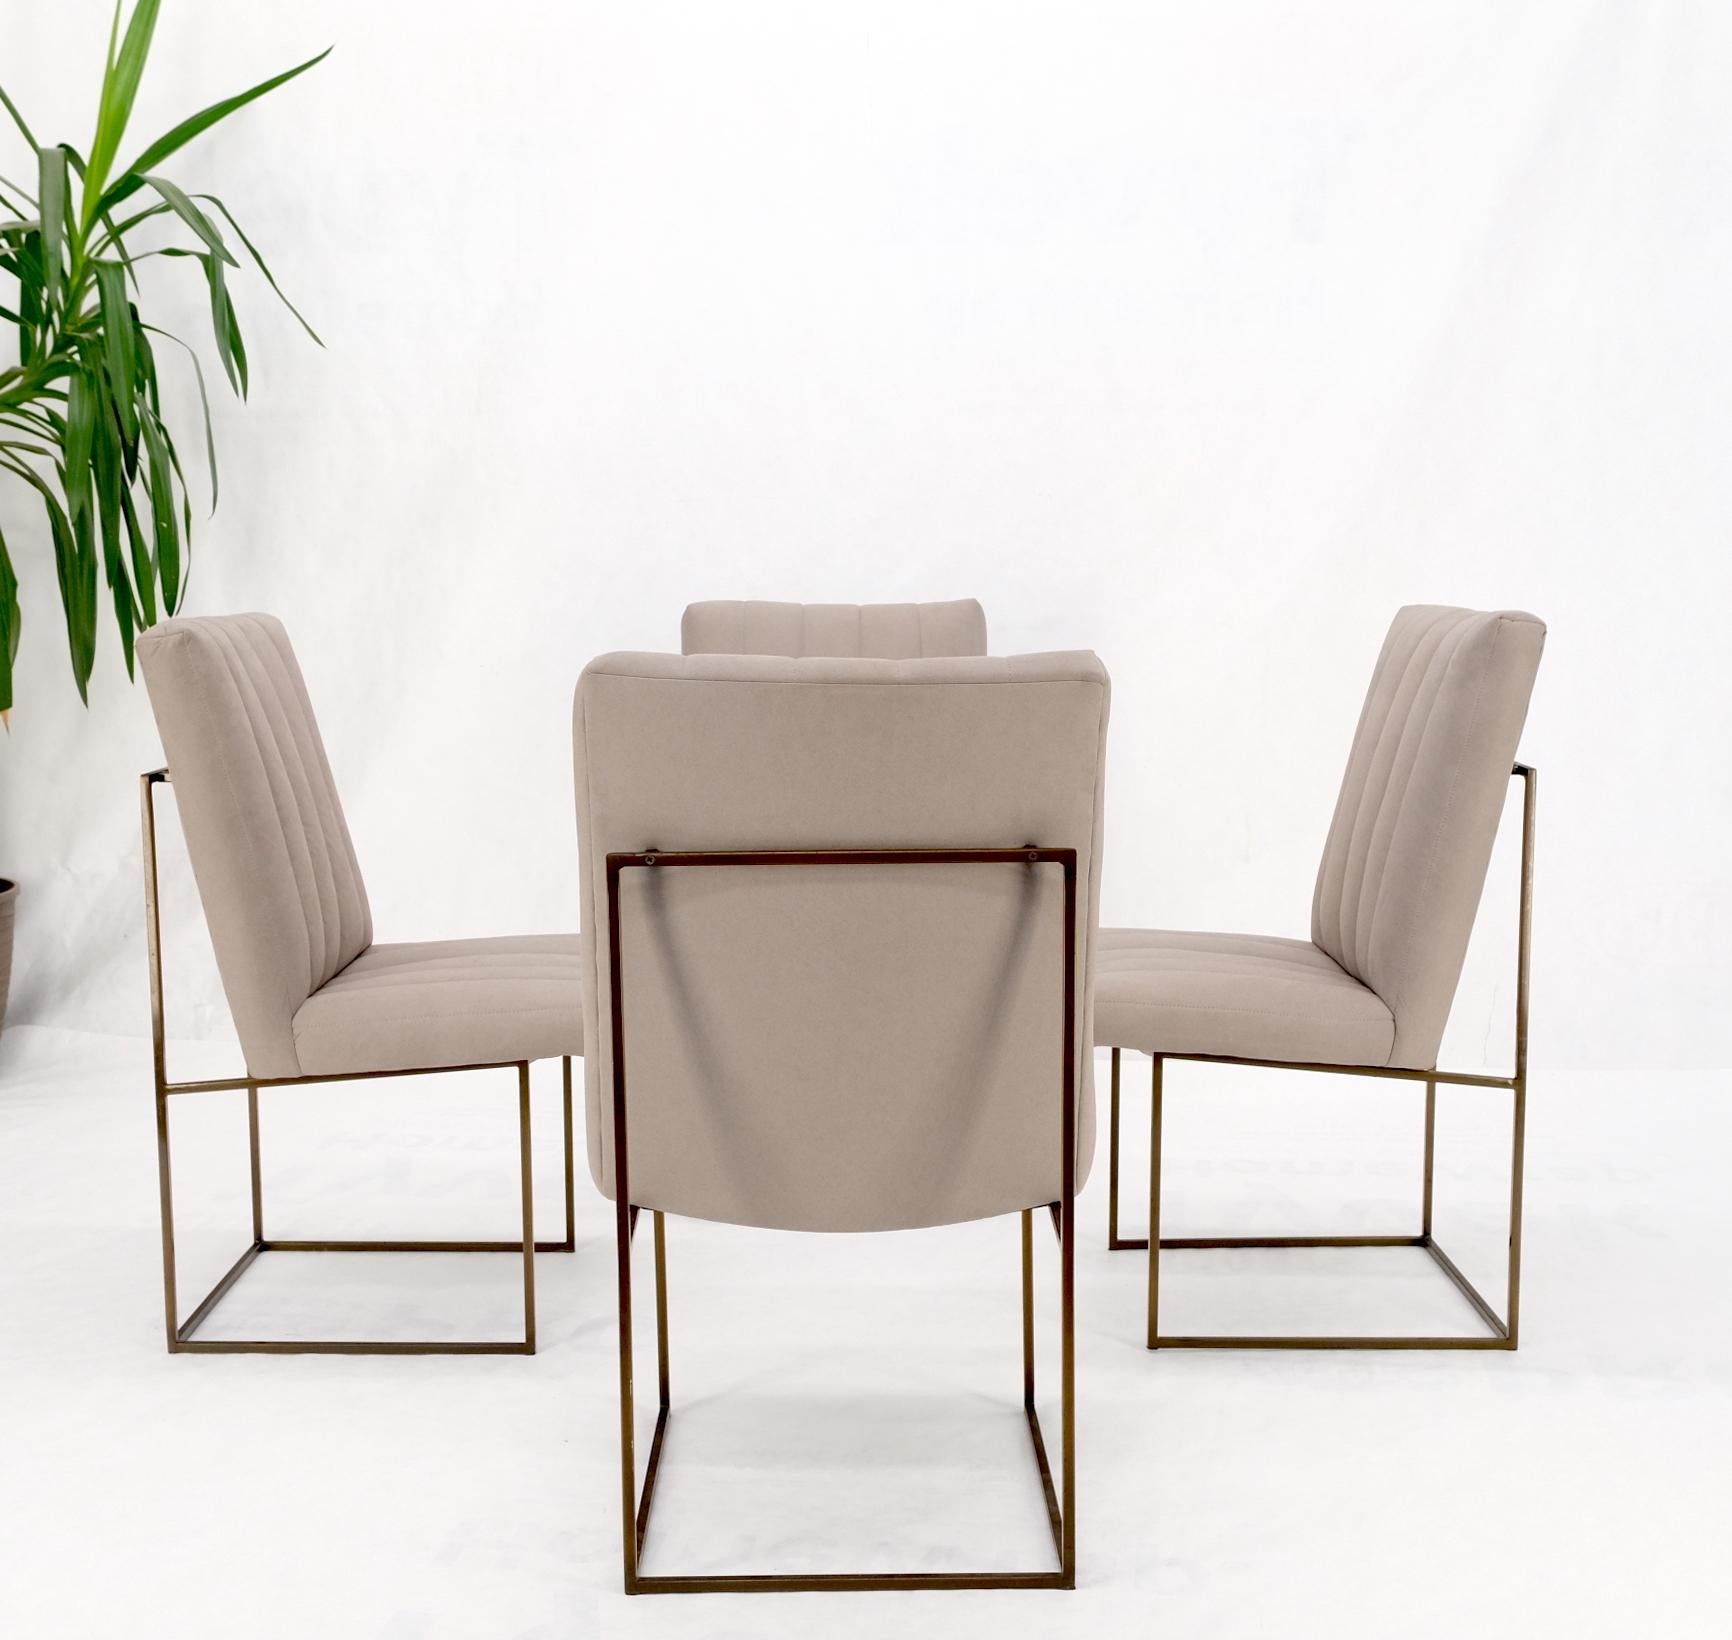 Set of 4 Milo Baughman Mid-Century Modern Dining Chairs New Alcantera Upholstery For Sale 5